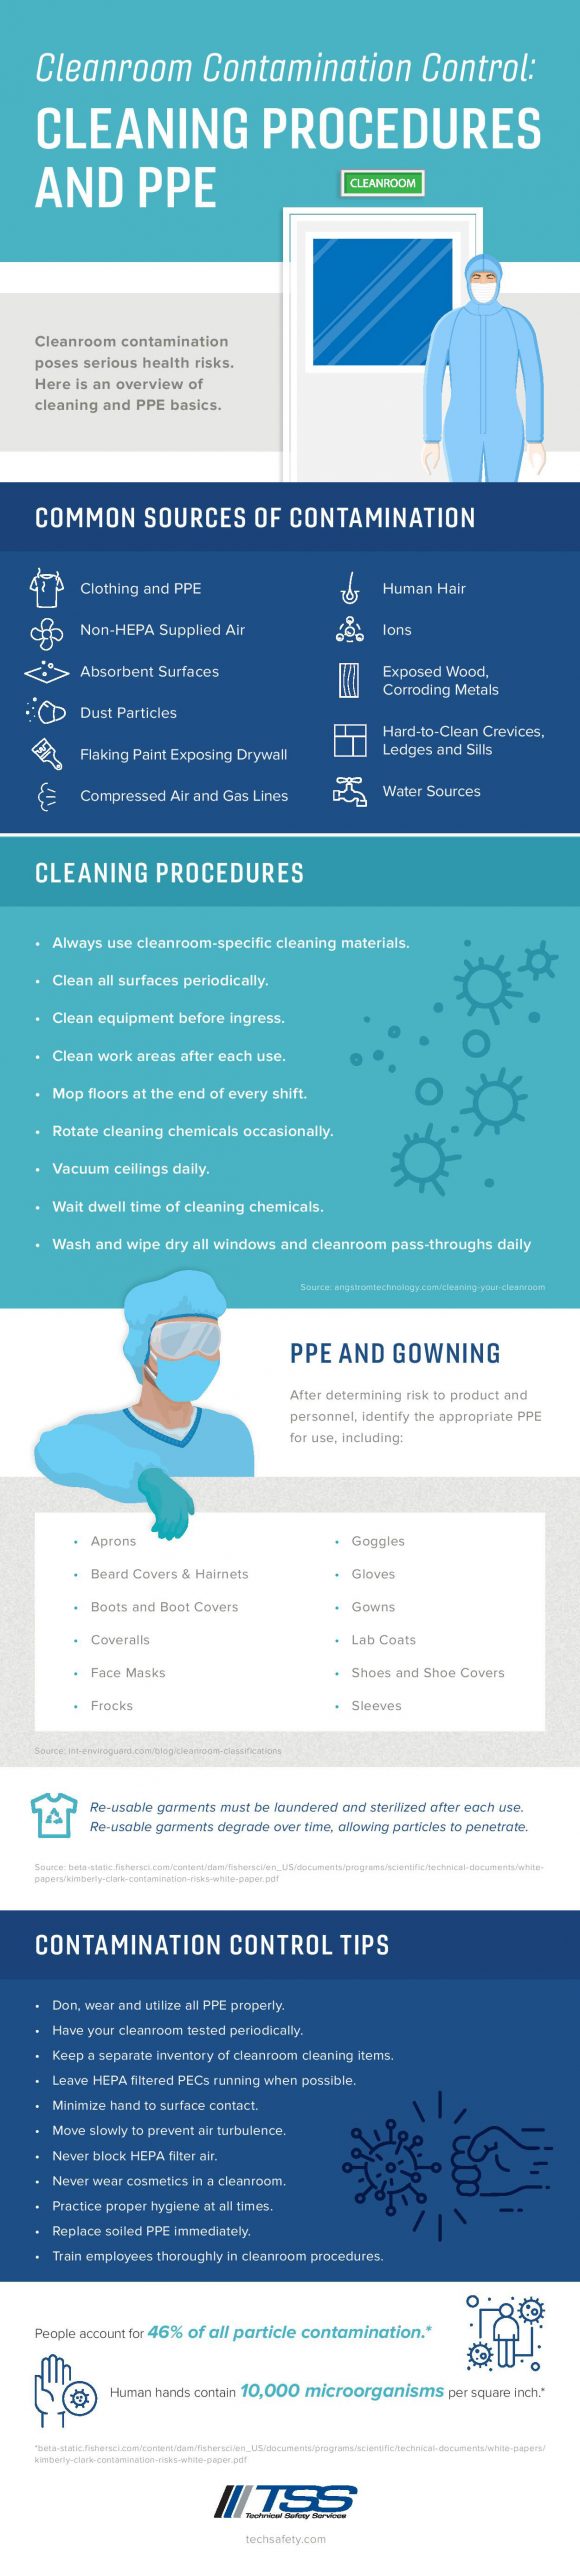 techsafety cleanroom contamination control ppe infographic